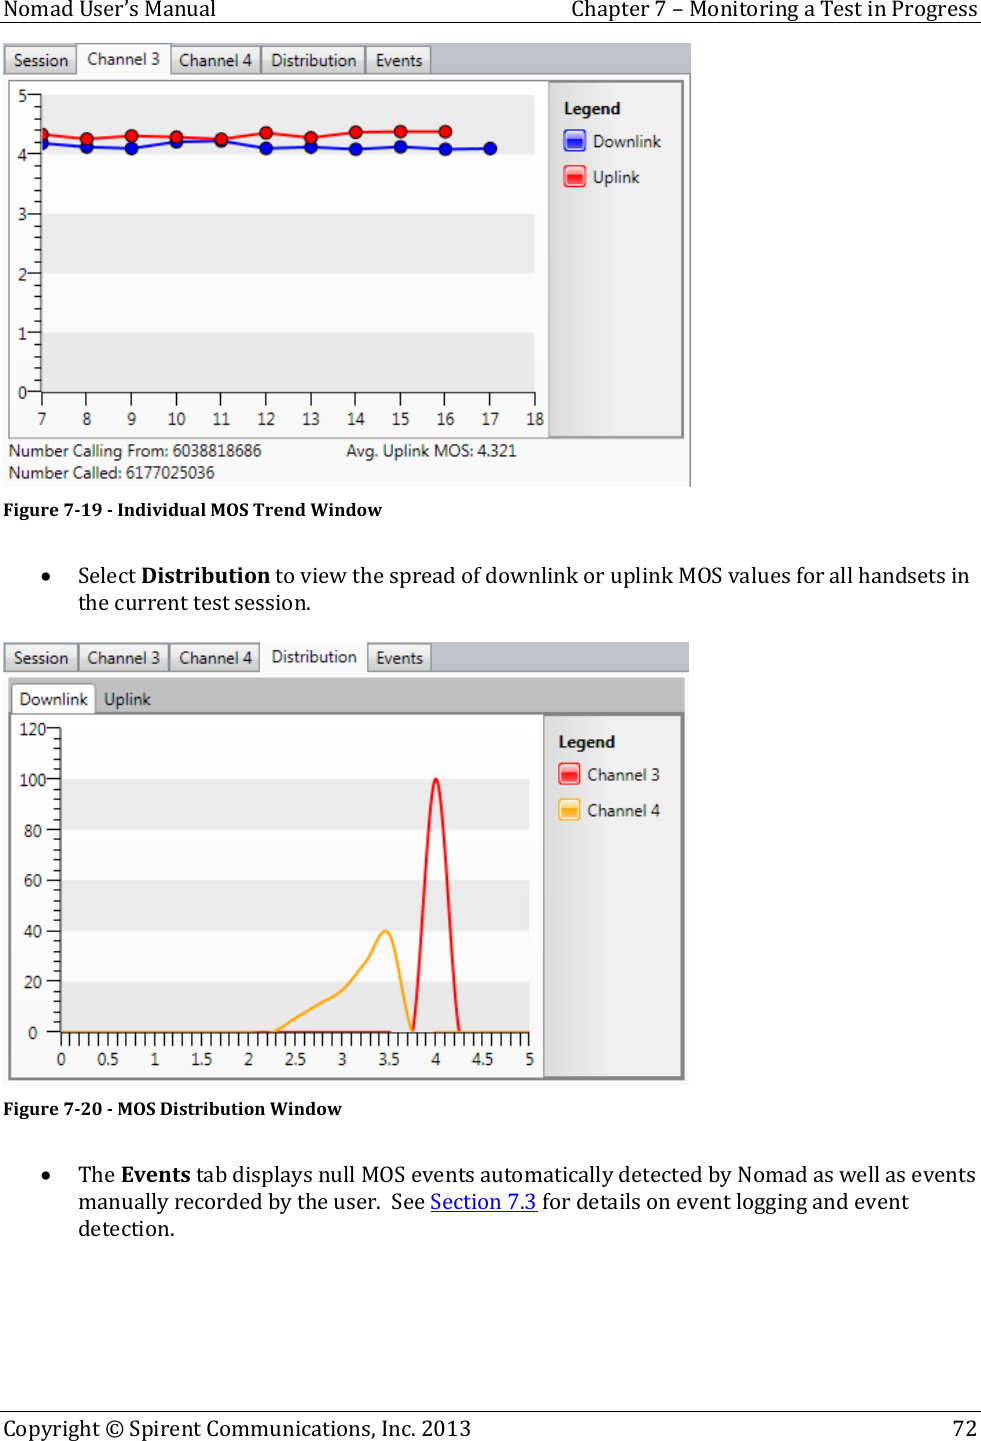  Nomad User’s Manual  Chapter 7 – Monitoring a Test in Progress Copyright © Spirent Communications, Inc. 2013    72   Figure 7-19 - Individual MOS Trend Window   Select Distribution to view the spread of downlink or uplink MOS values for all handsets in the current test session.    Figure 7-20 - MOS Distribution Window   The Events tab displays null MOS events automatically detected by Nomad as well as events manually recorded by the user.  See Section 7.3 for details on event logging and event detection.  